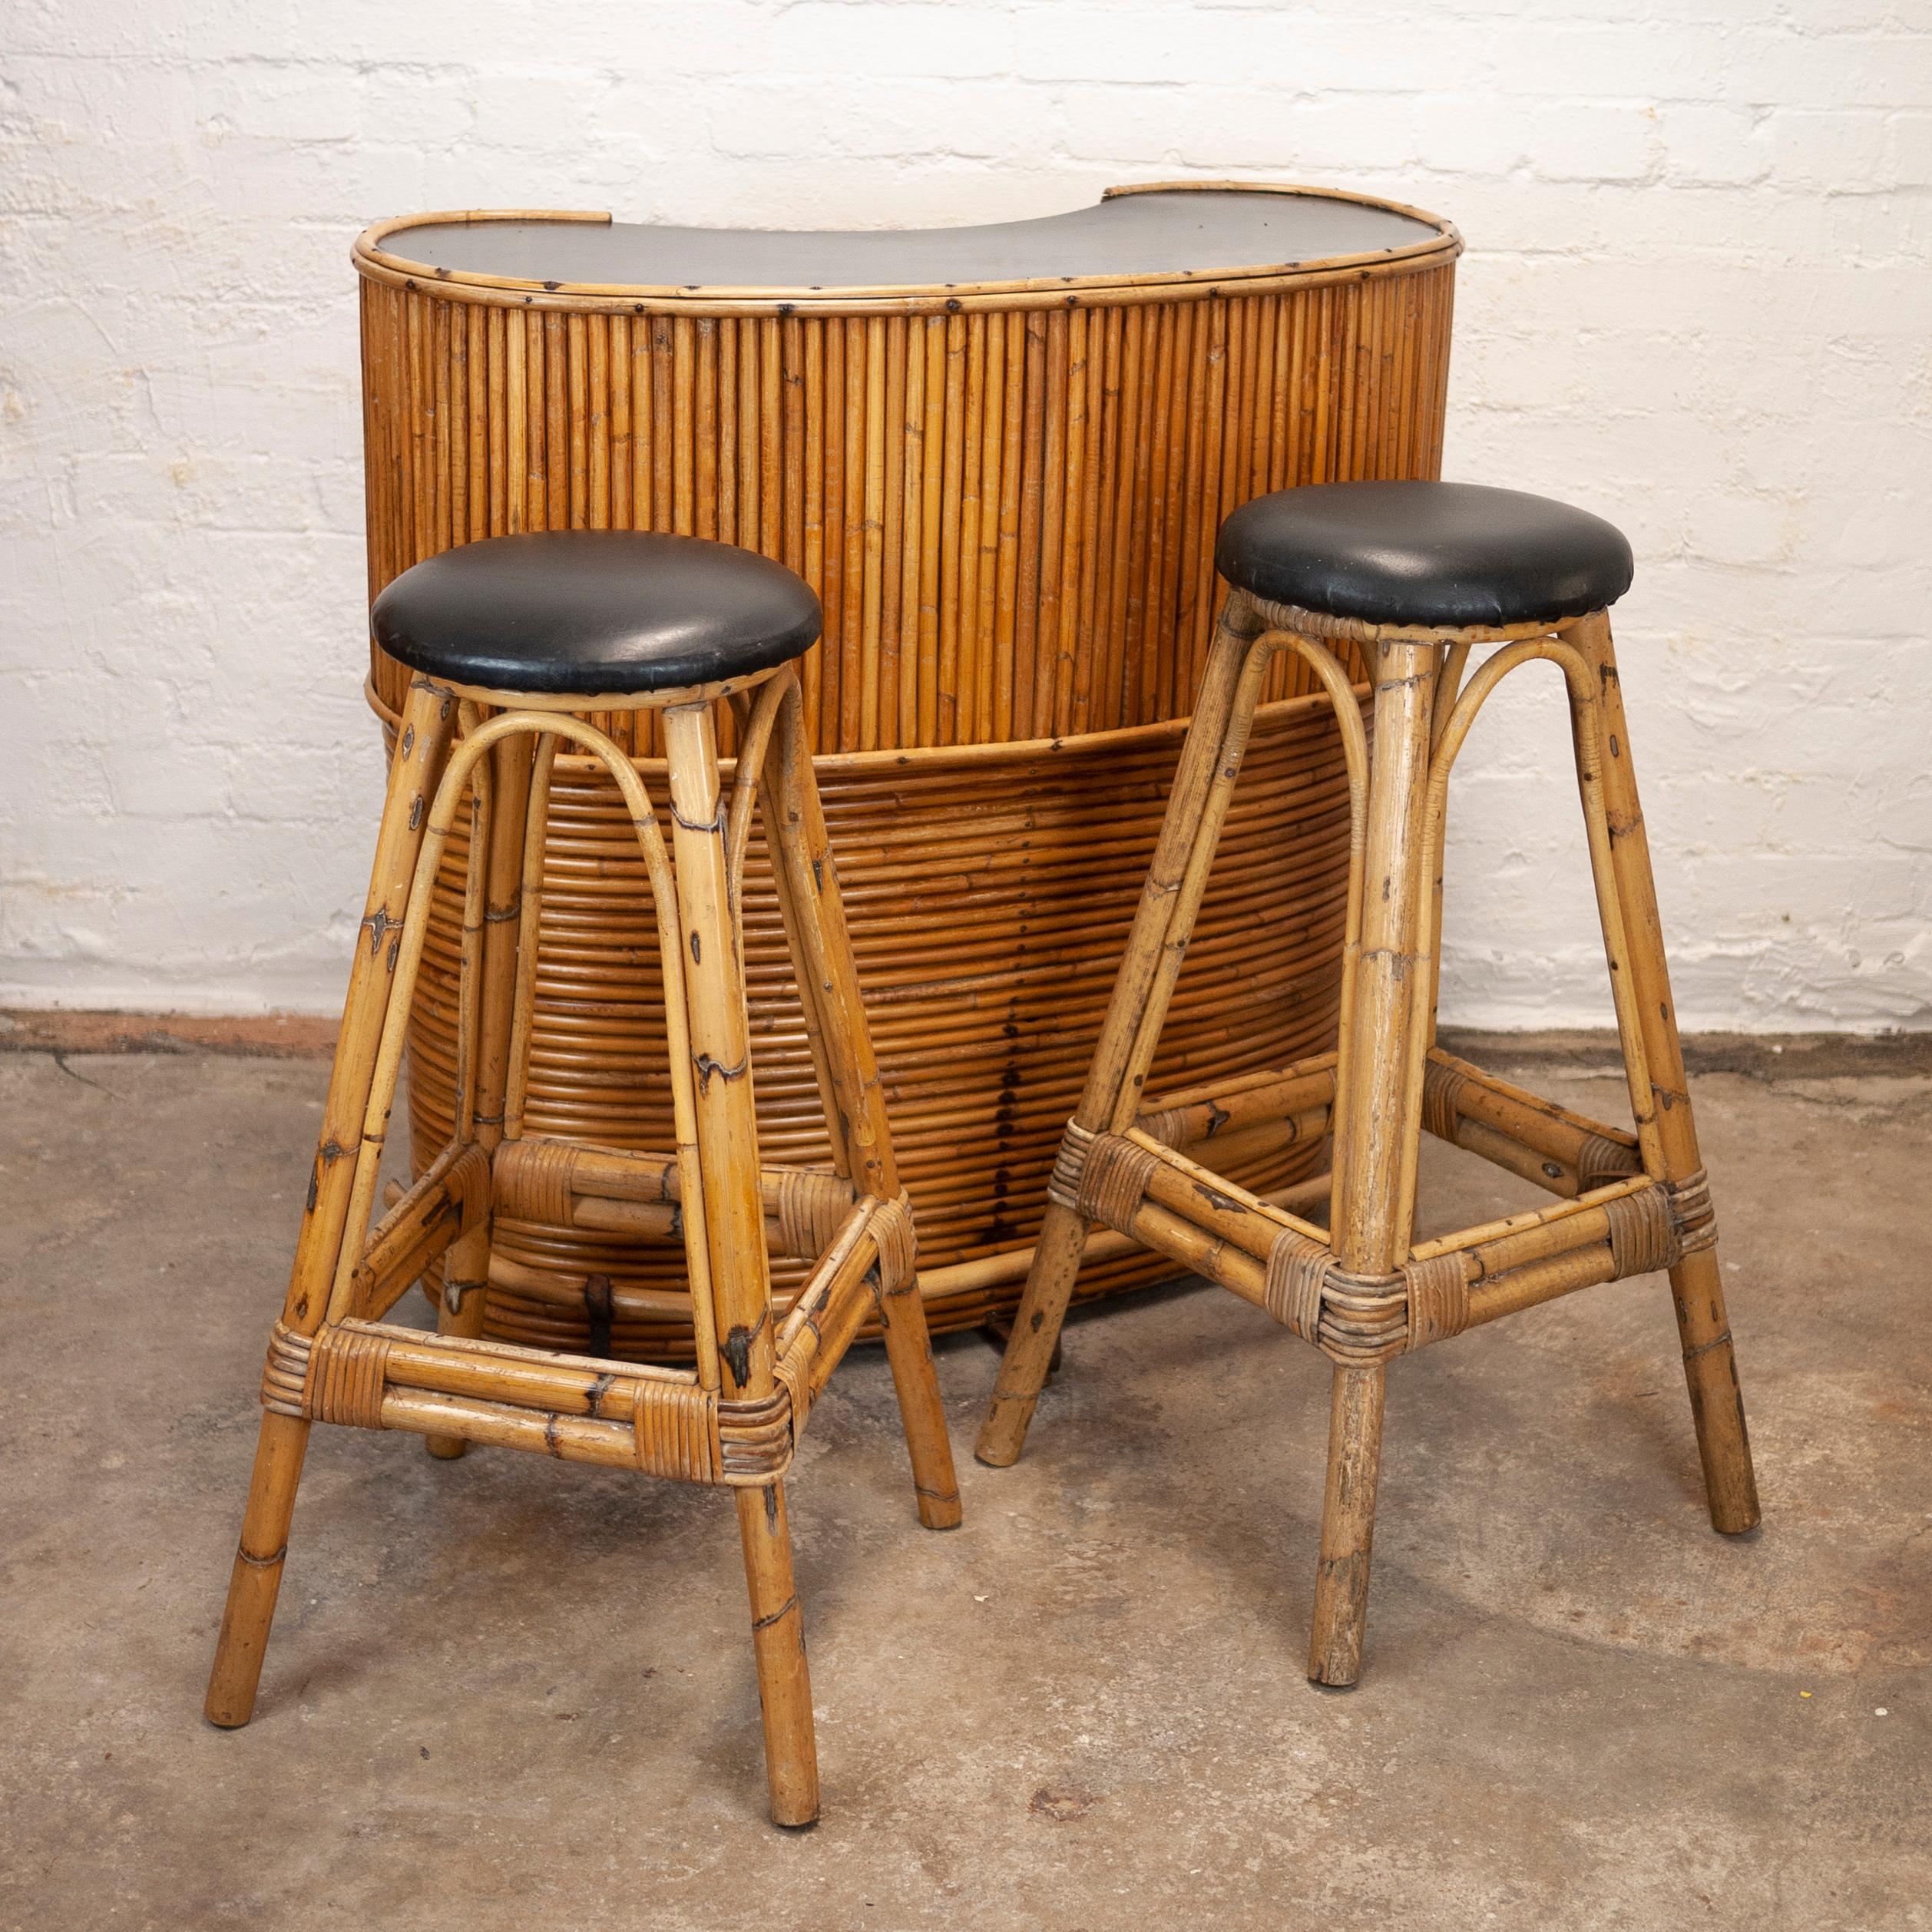 A vintage bamboo tiki bar and 2 stools from the 1960s.

Design Period - 1960 to 1969

Country of Manufacture - France

Style - mid-century

Detailed condition - good with minimal defects. Stool seats show wear which is visible in